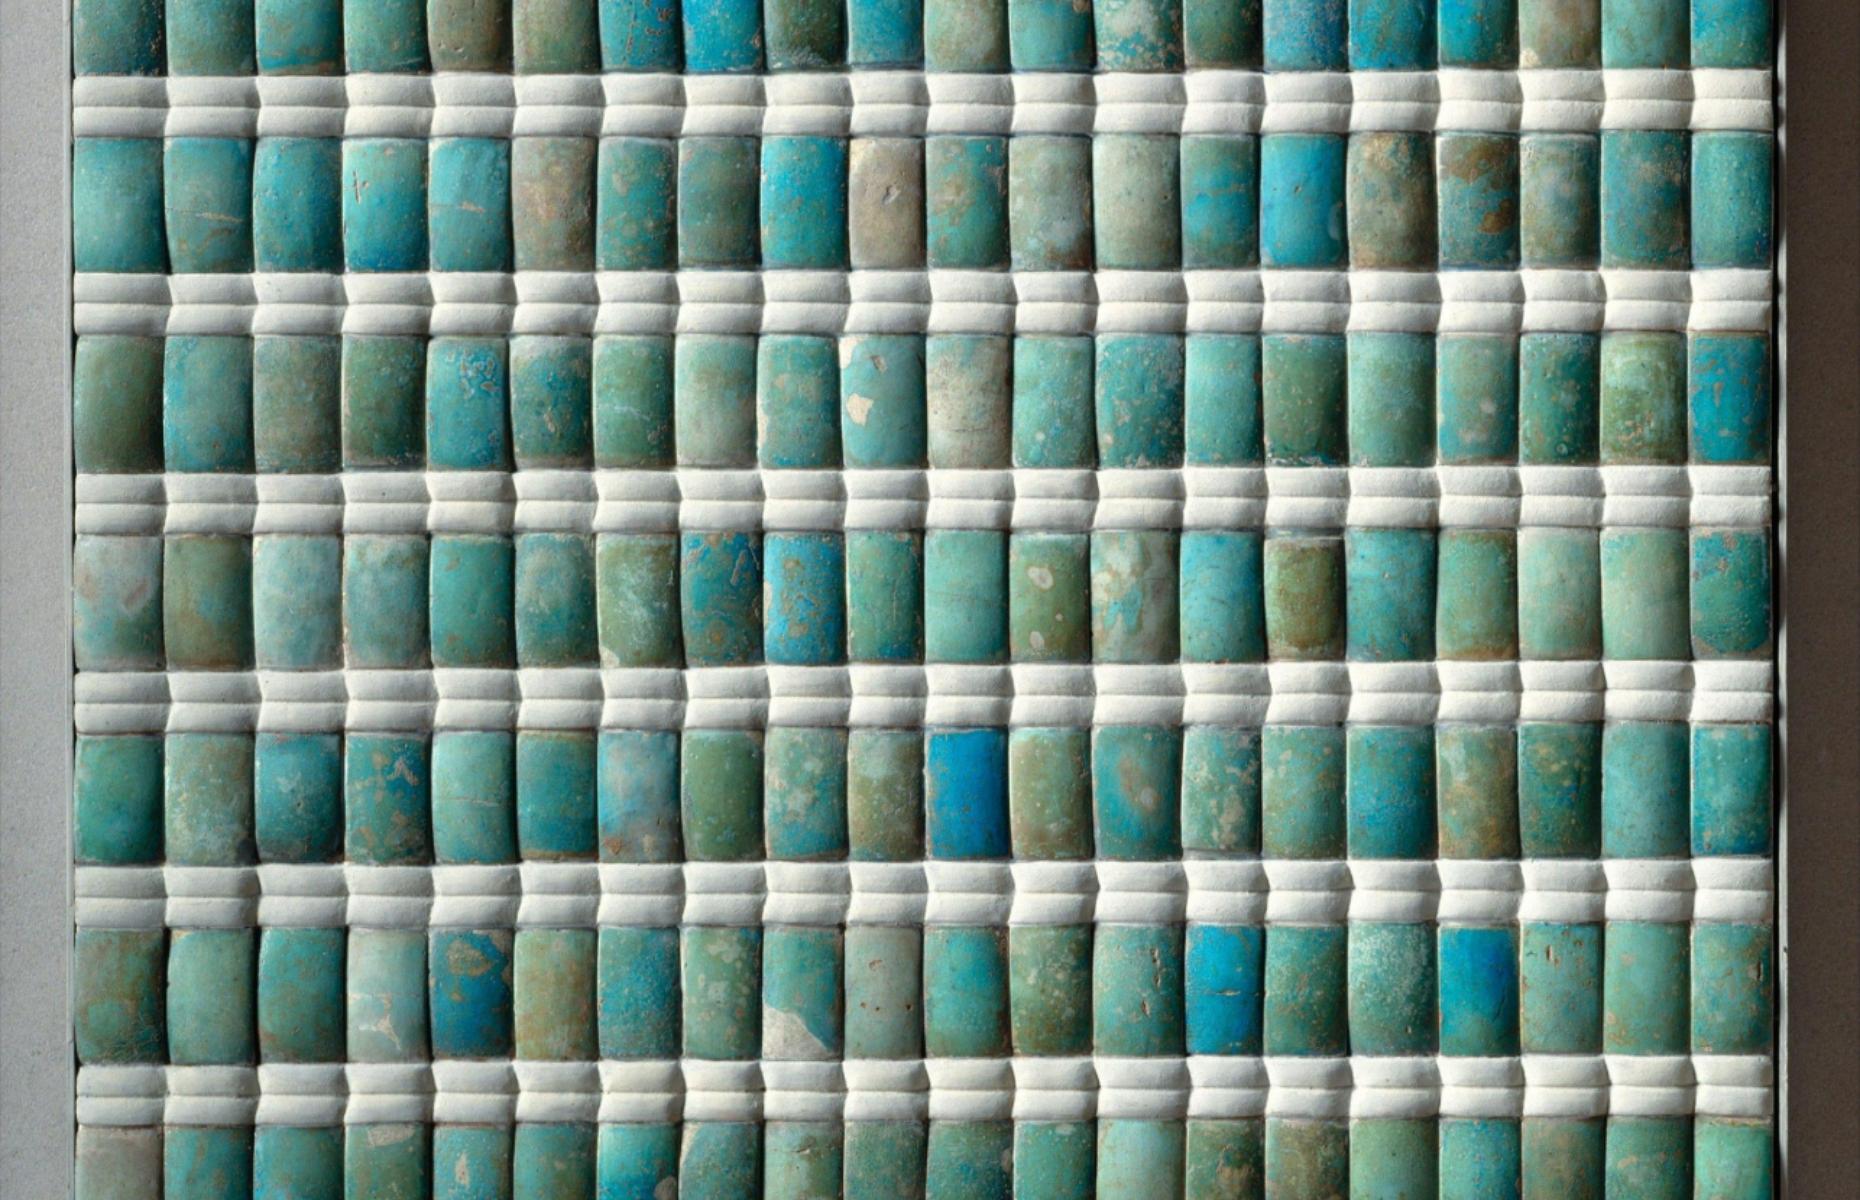 <p>A series of beautiful blue and green tiles were uncovered in the galleries and burial chamber; these once lined the walls and imitated the sheets of reeds that would have originally hung in the king’s royal palace. The blue and green colours symbolised rebirth. The glazed ceramic tiles were created in the faience style, with restored sections on display at the Imhotep Museum in Saqqara and the Metropolitan Museum of Art in New York.</p>